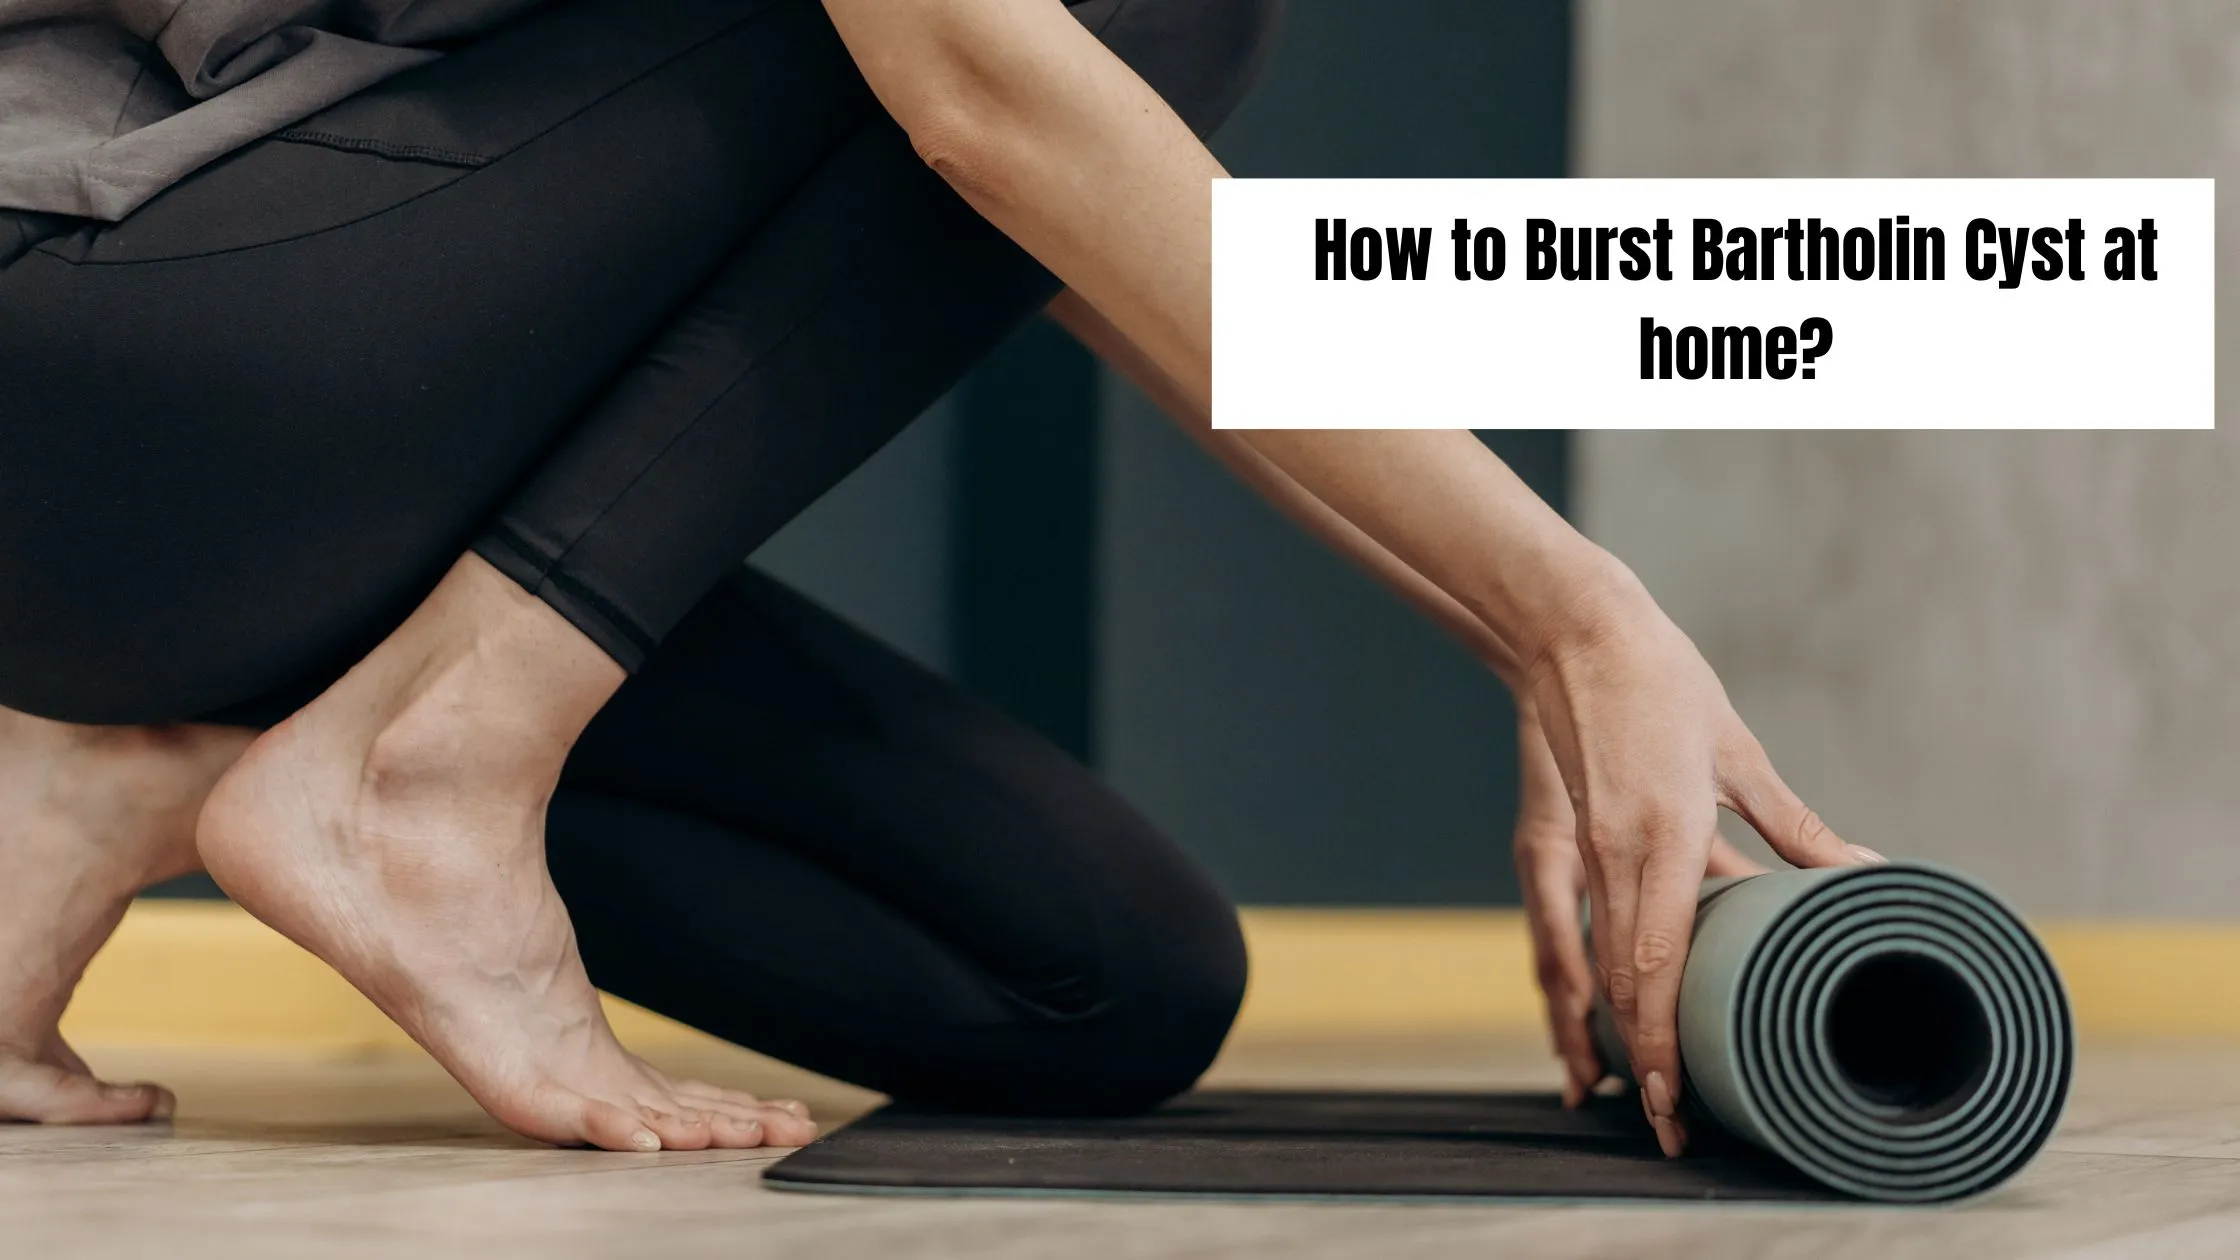 How To Burst A Bartholin Cyst At Home Safety Tips